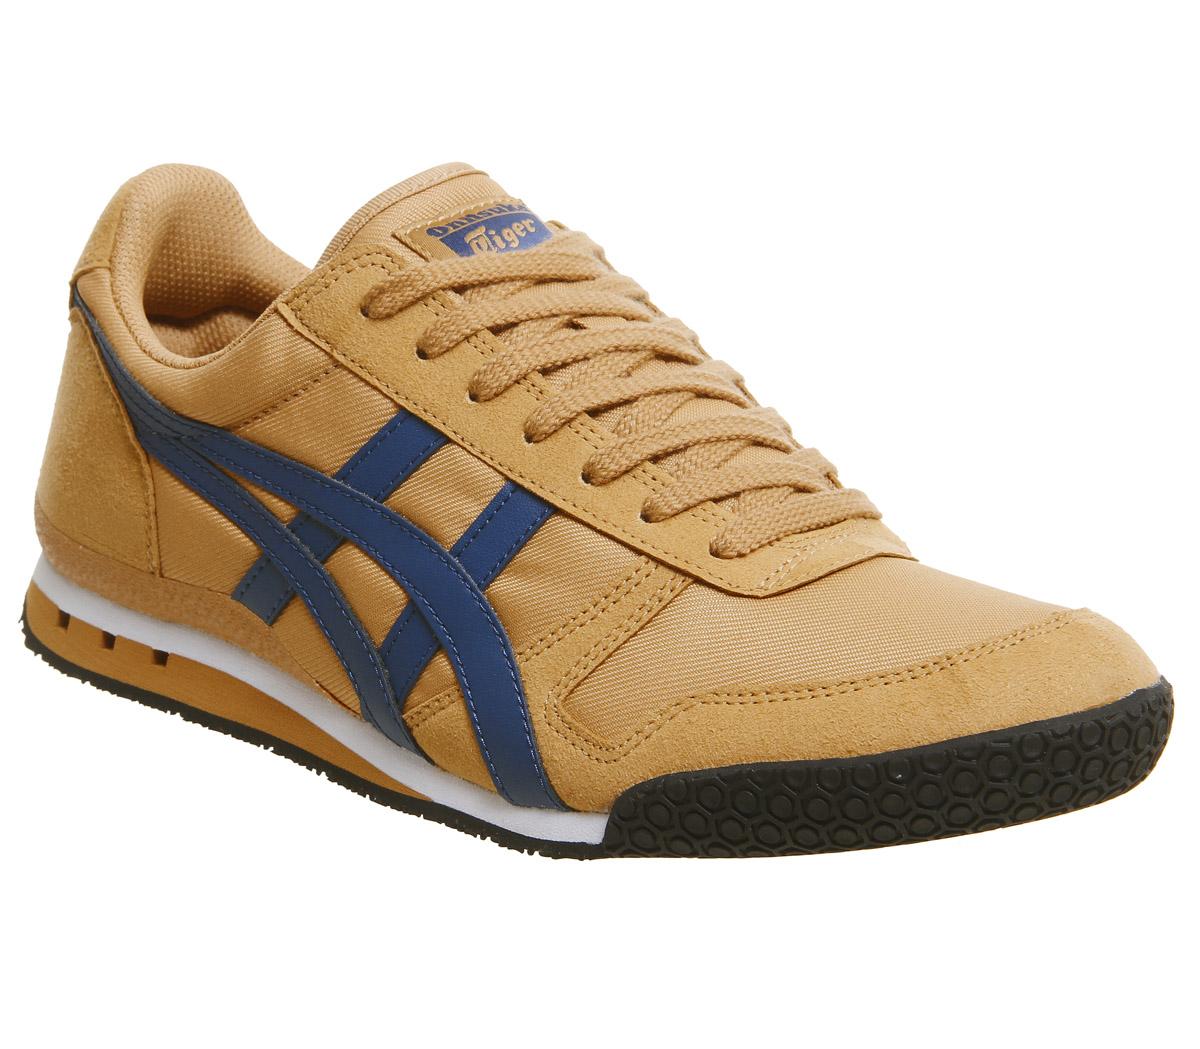  Onitsuka Tiger Ultimate 81  Trainers Caravan Midnight Blue 